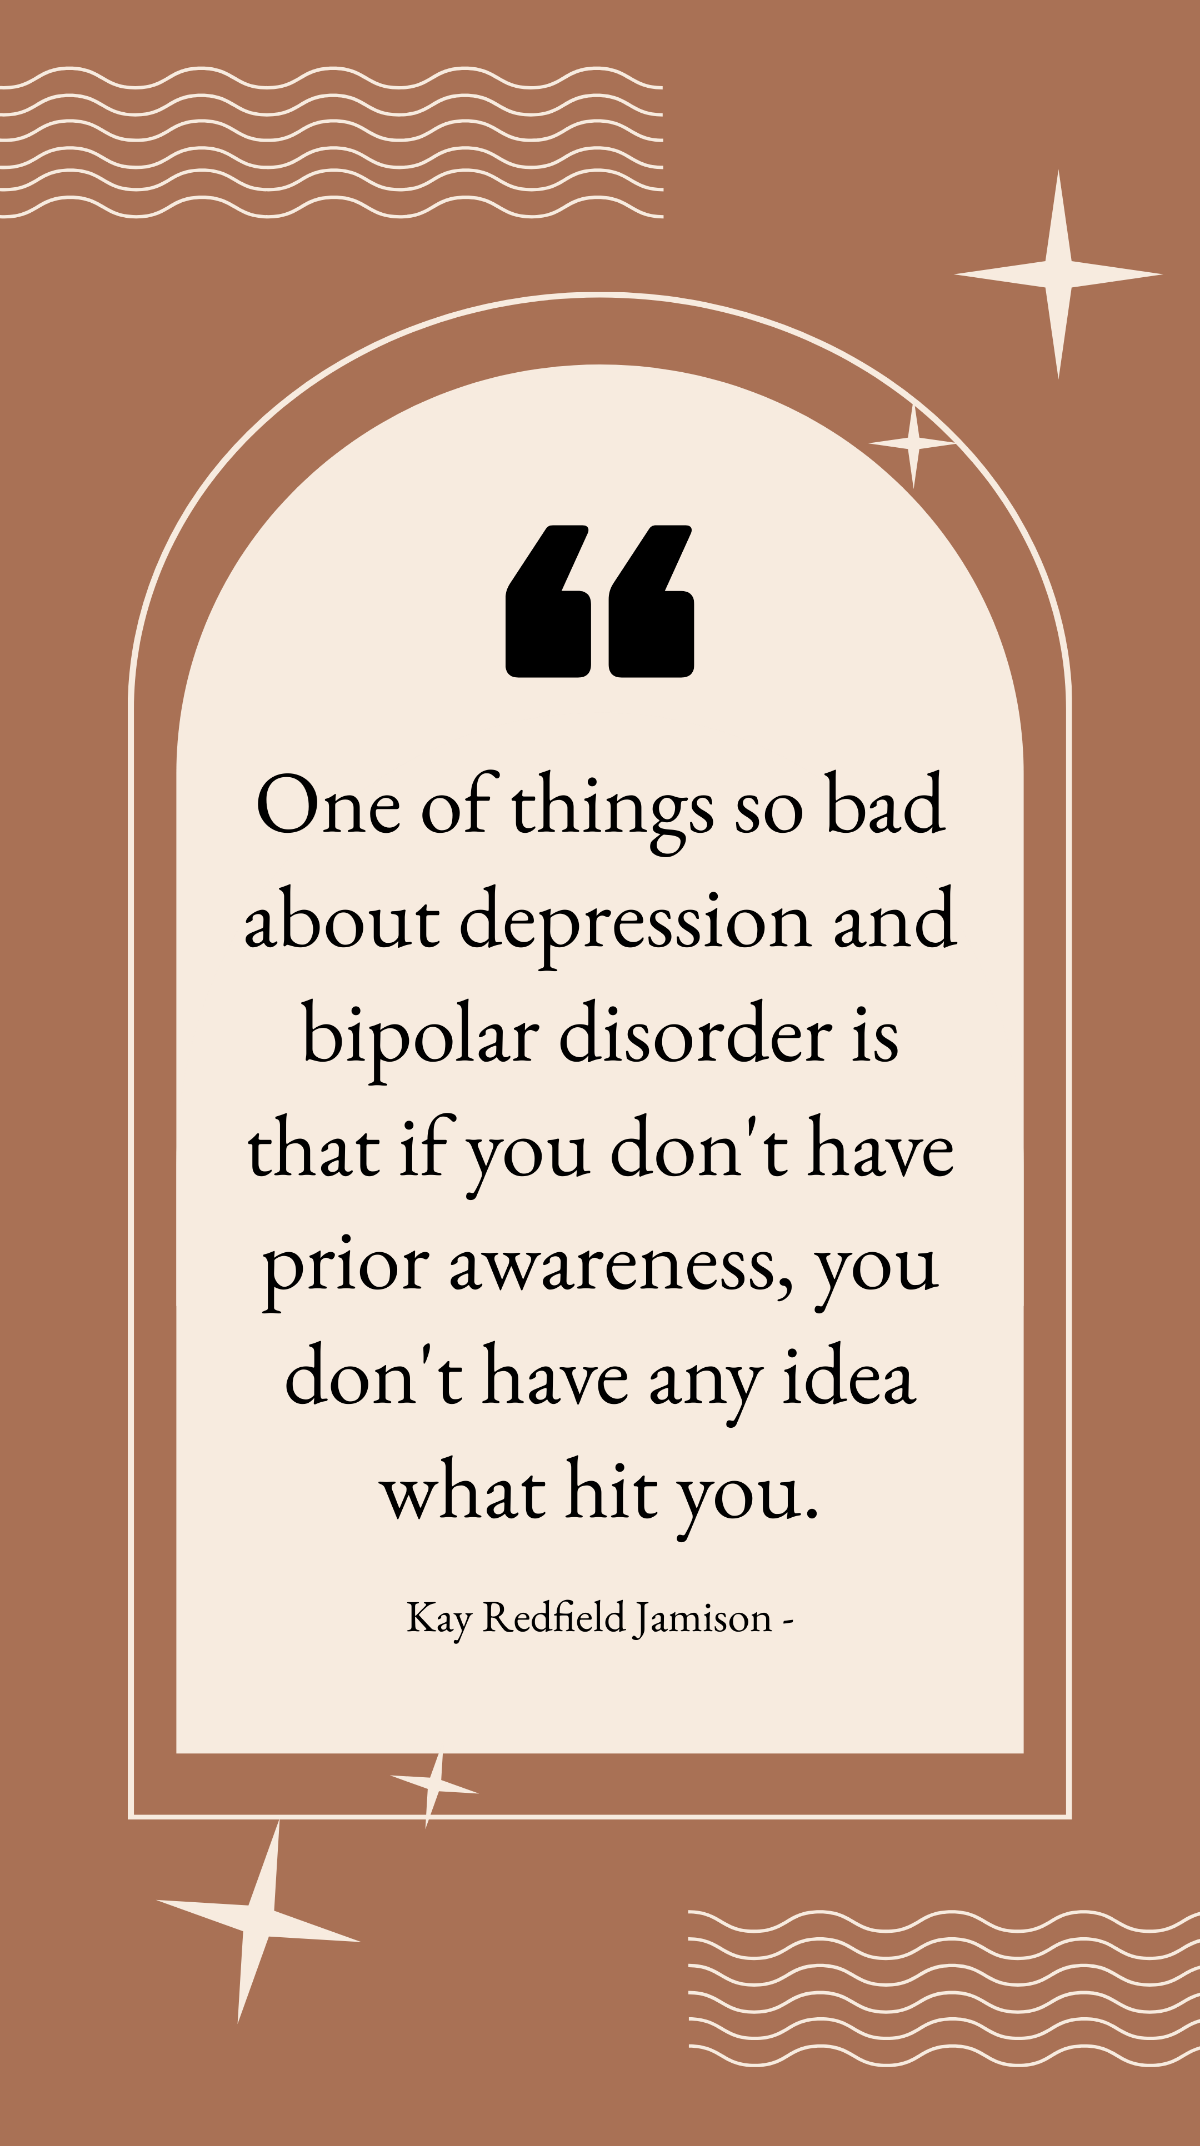 Kay Redfield Jamison - One of things so bad about depression and bipolar disorder is that if you don't have prior awareness, you don't have any idea what hit you. Template